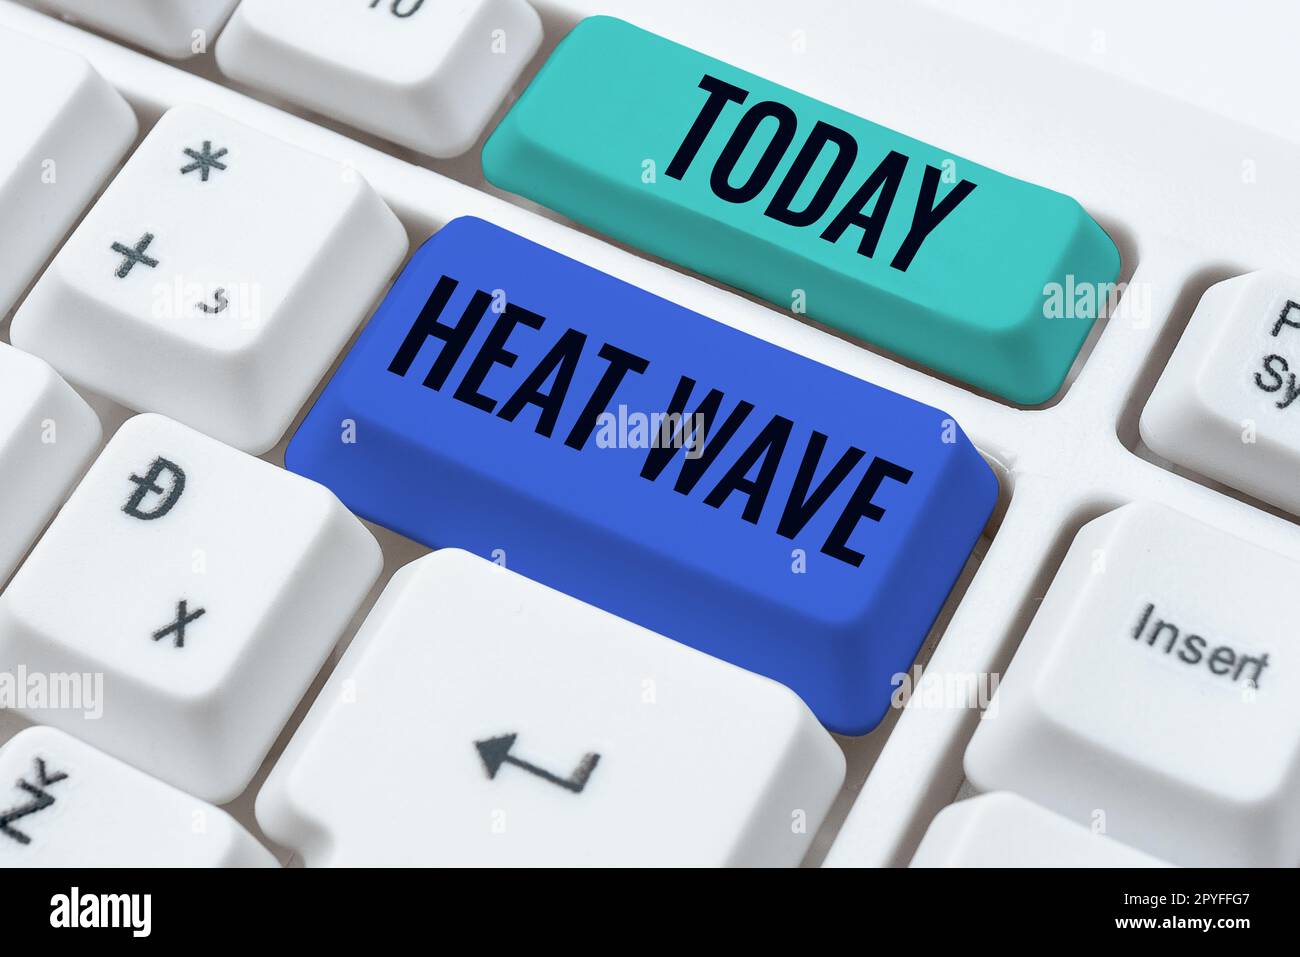 Writing displaying text Heat Wave. Business overview a prolonged period of abnormally hot weather Stock Photo